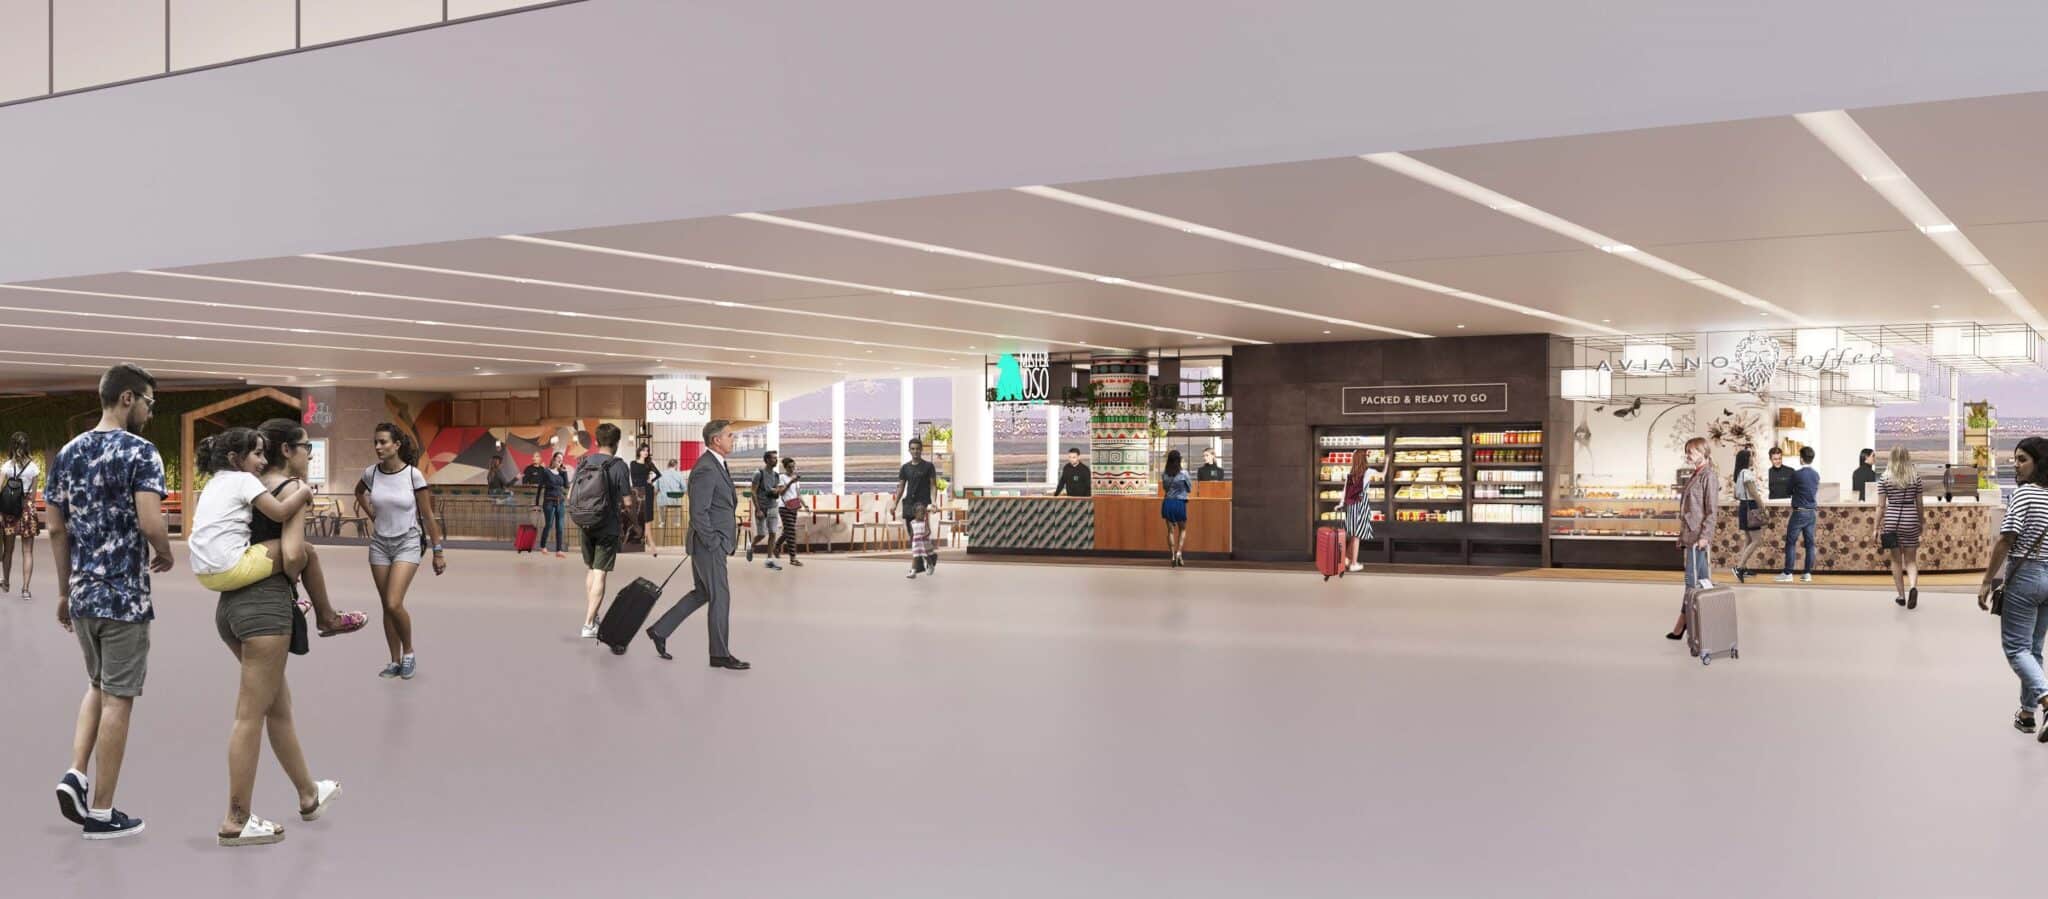 Culinary Creative Airport Marketplace Concourse C scaled